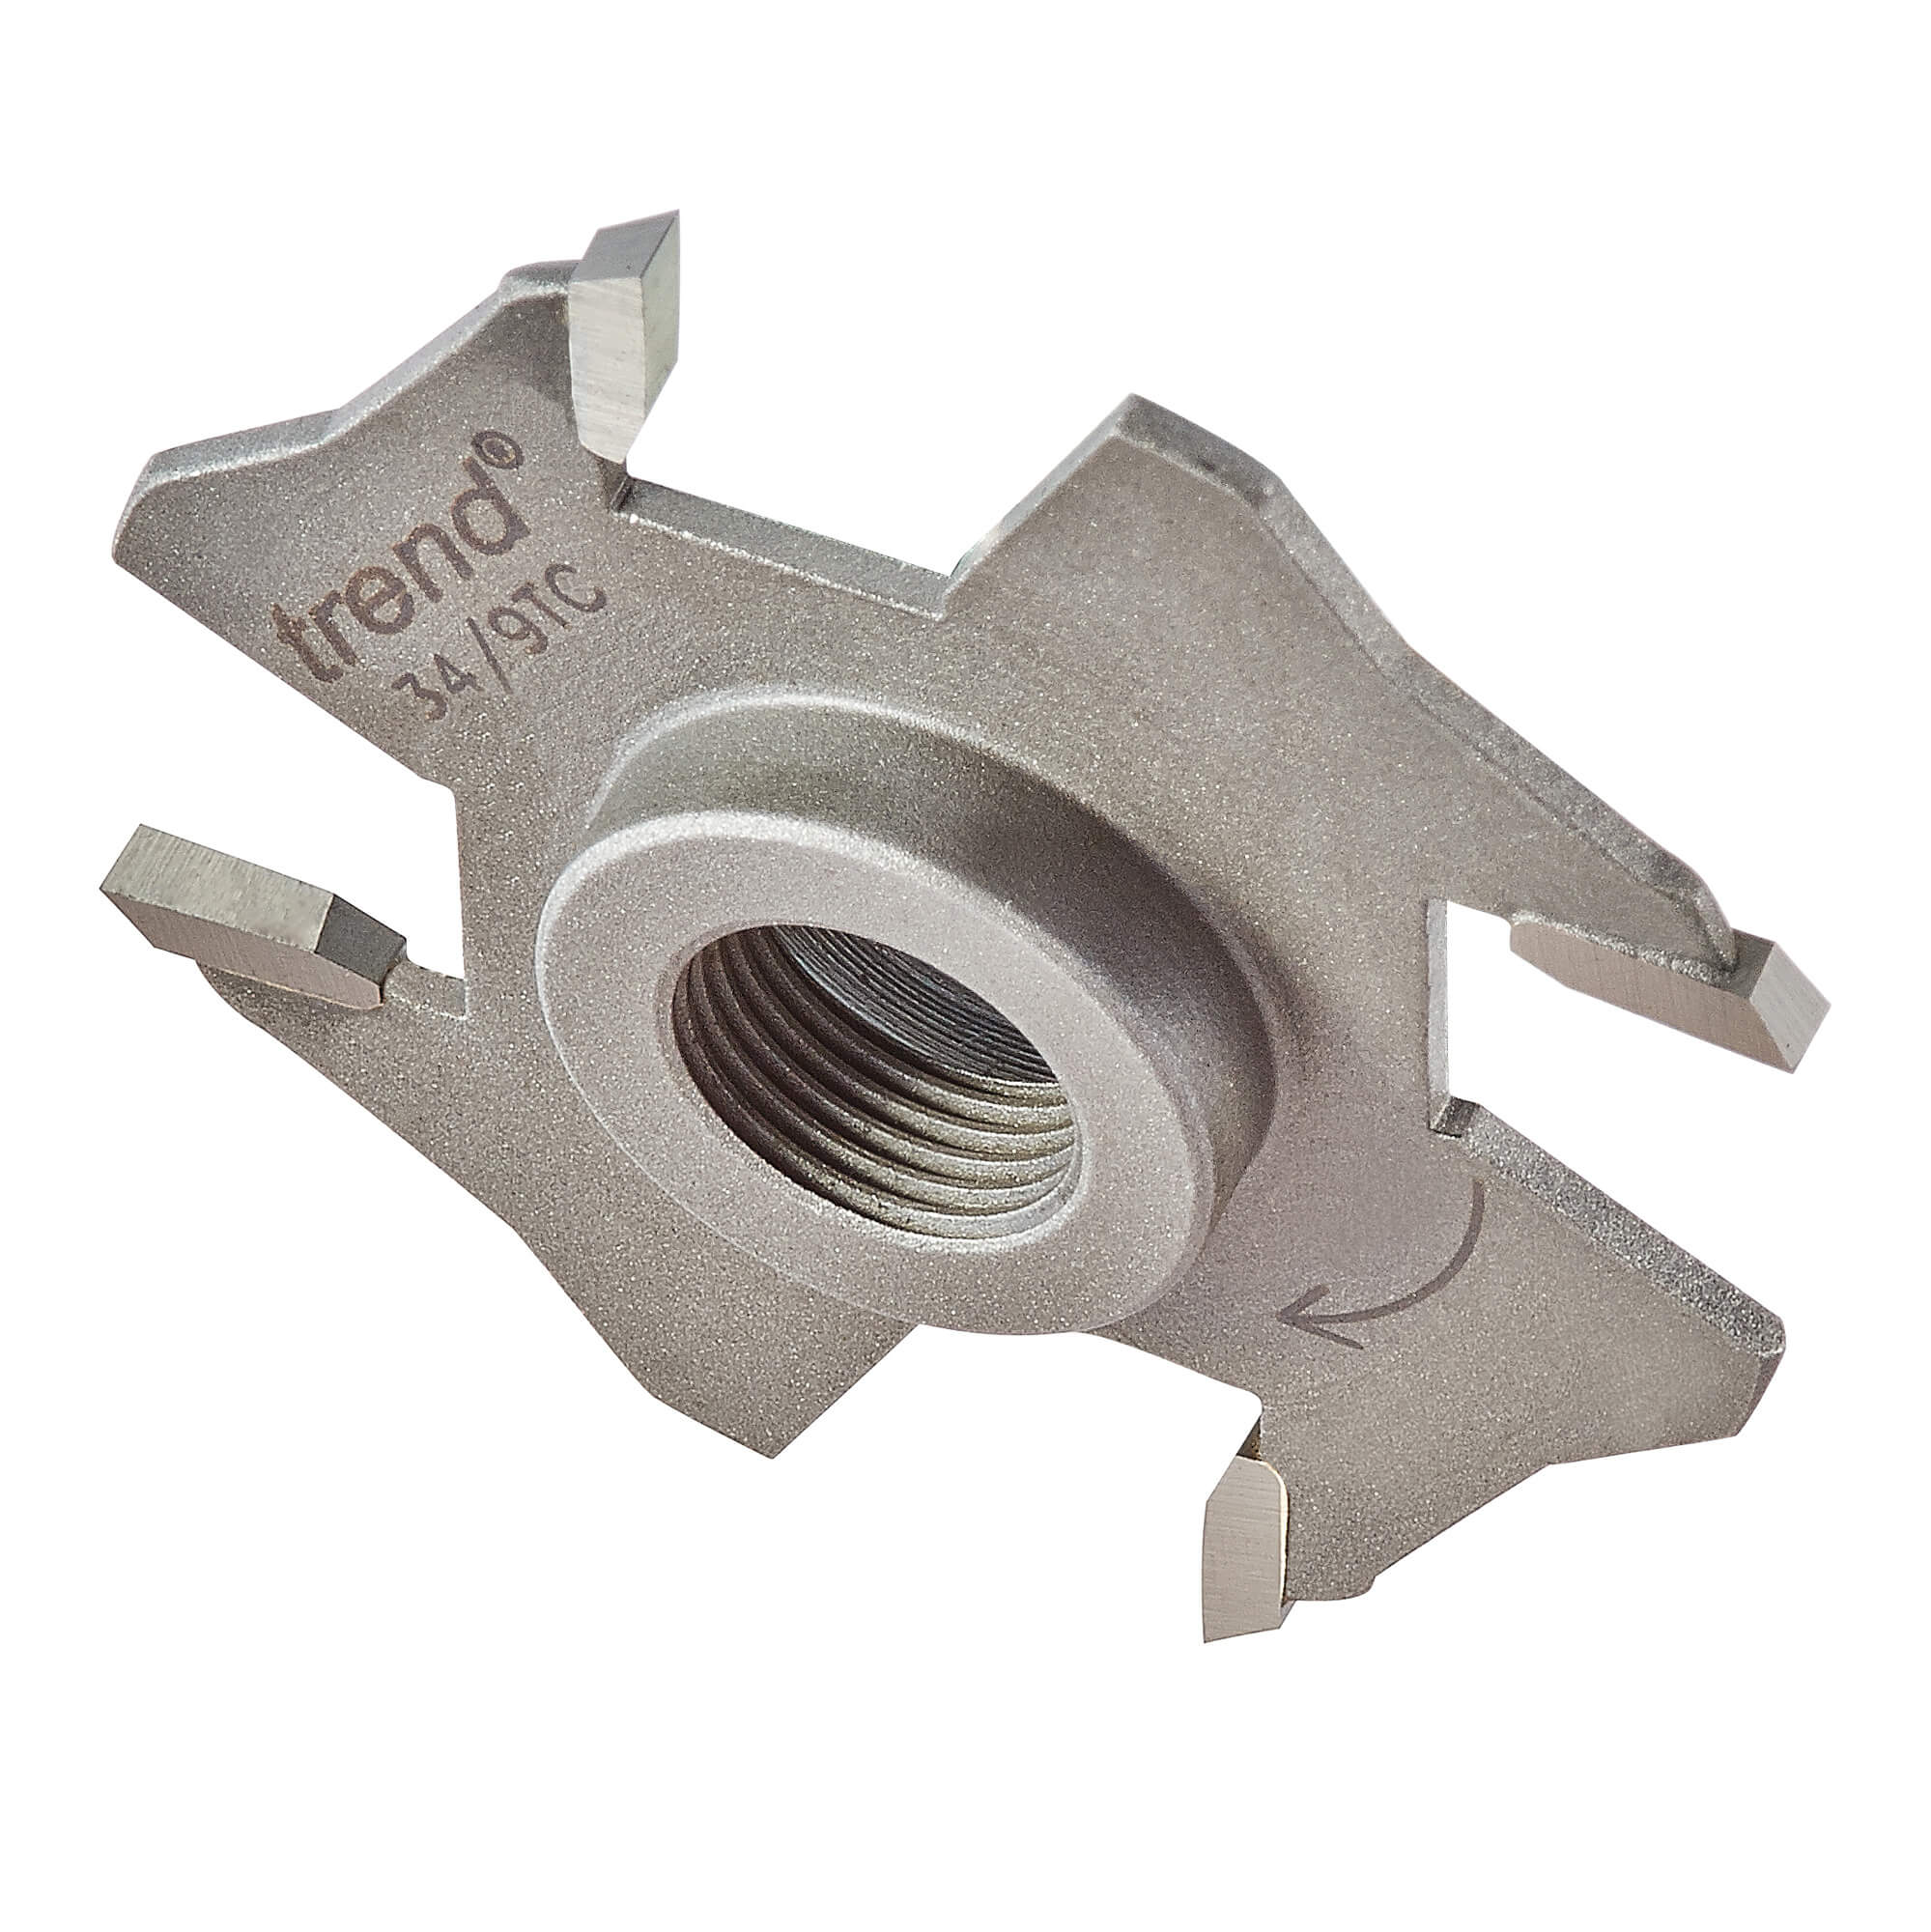 Image of Trend Threaded Slotter Blade for 33 Series M12 Arbors 50mm 2.5mm M12 Thread